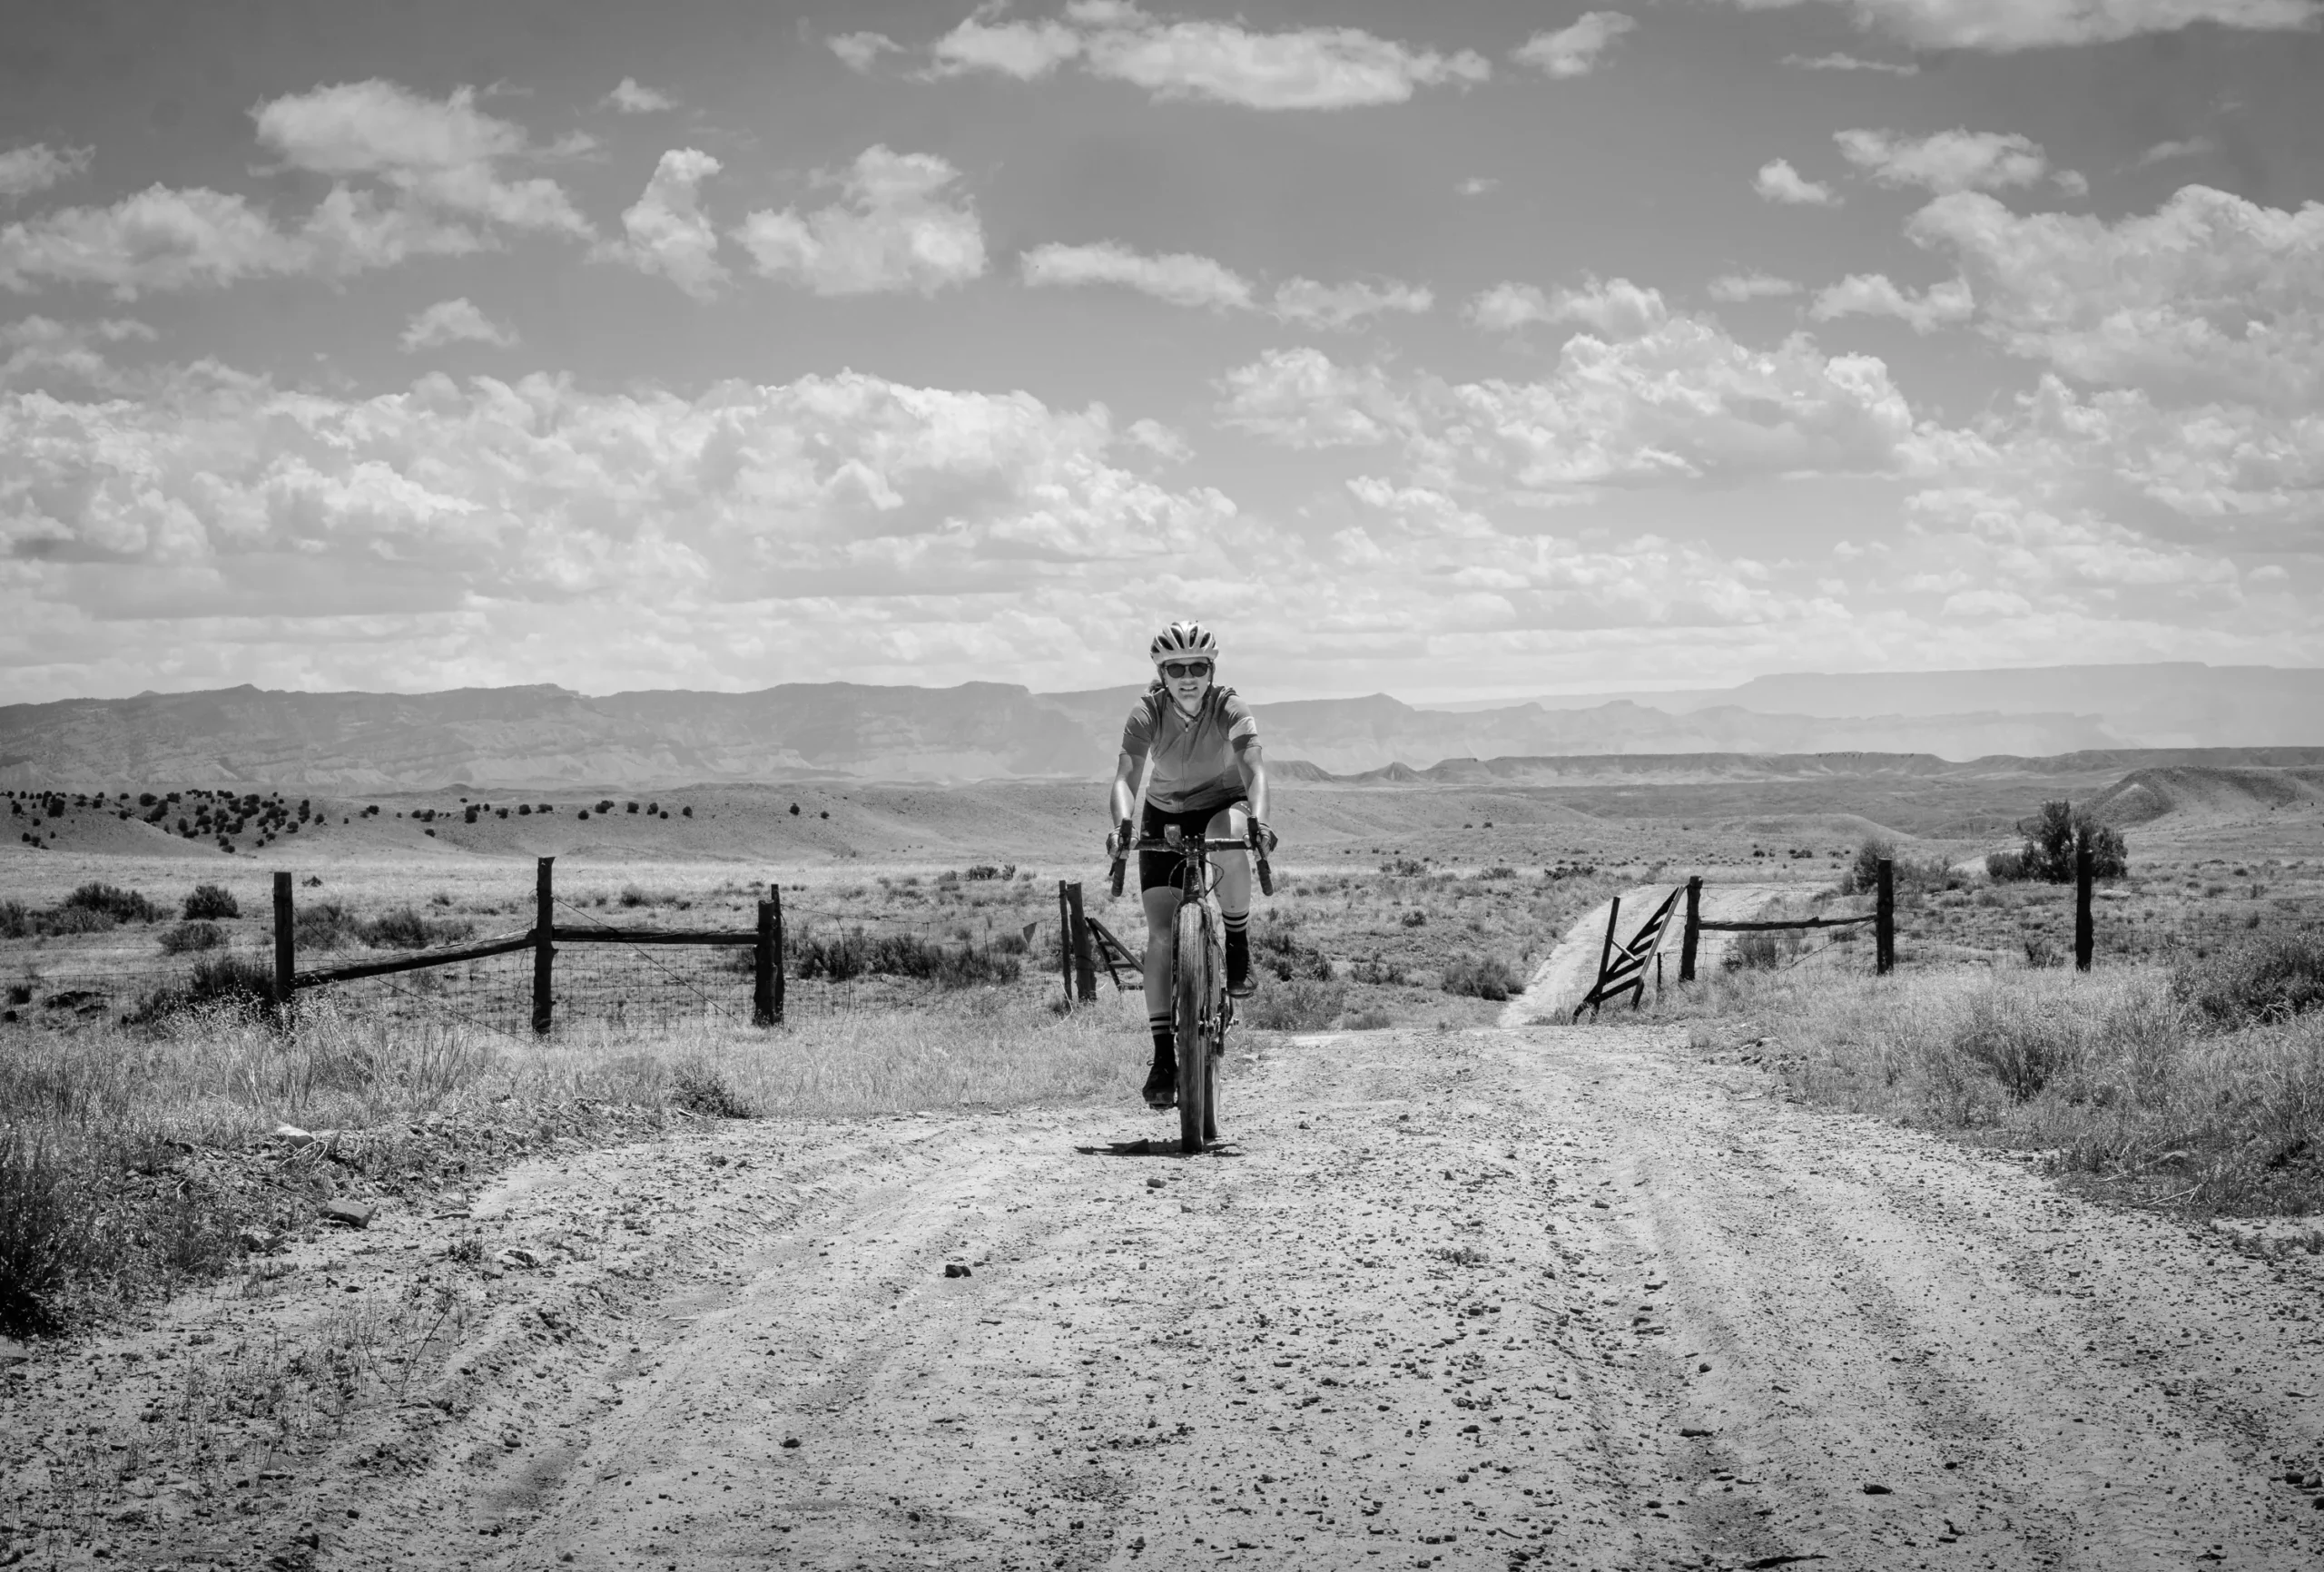 Connie Etter reflects on 2020 and riding with her Otso Cycles Waheela C gravel bike.